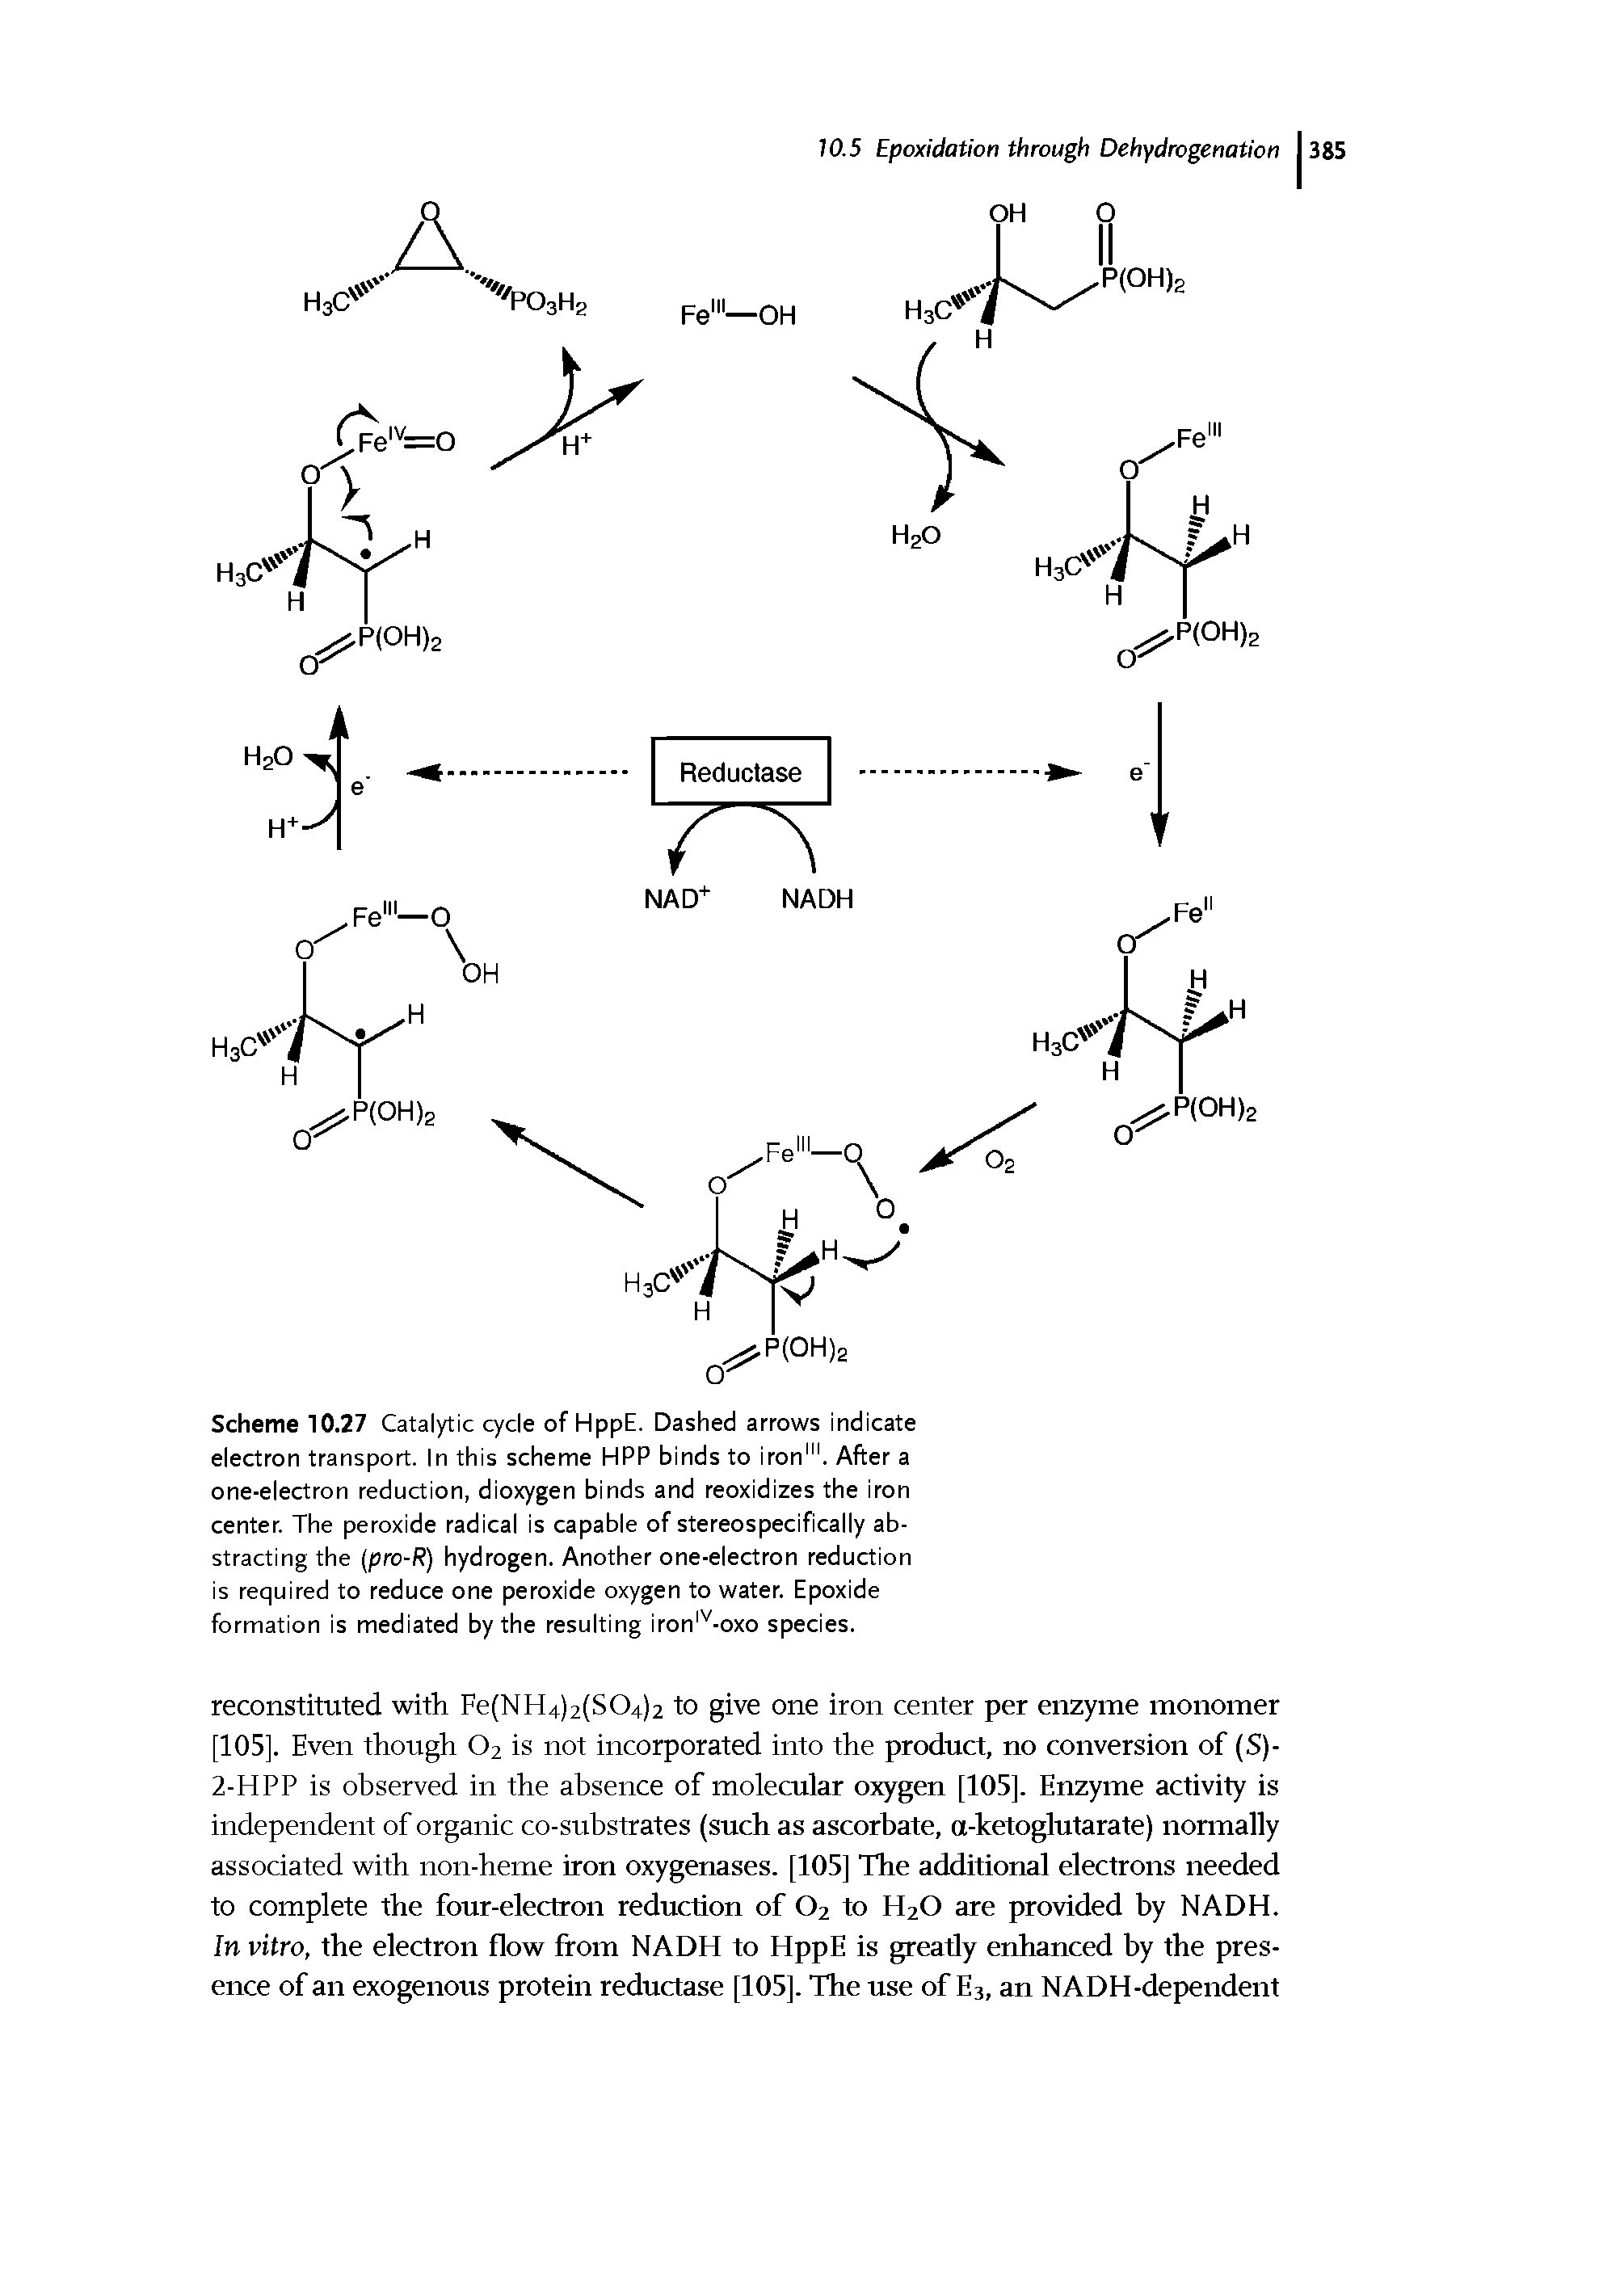 Scheme 10.27 Catalytic cycle of HppE. Dashed arrows indicate electron transport. In this scheme HPP binds to iron1". After a one-electron reduction, dioxygen binds and reoxidizes the iron center. The peroxide radical is capable of stereospecifically abstracting the (pro-R) hydrogen. Another one-electron reduction is required to reduce one peroxide oxygen to water. Epoxide formation is mediated by the resulting ironlv-oxo species.